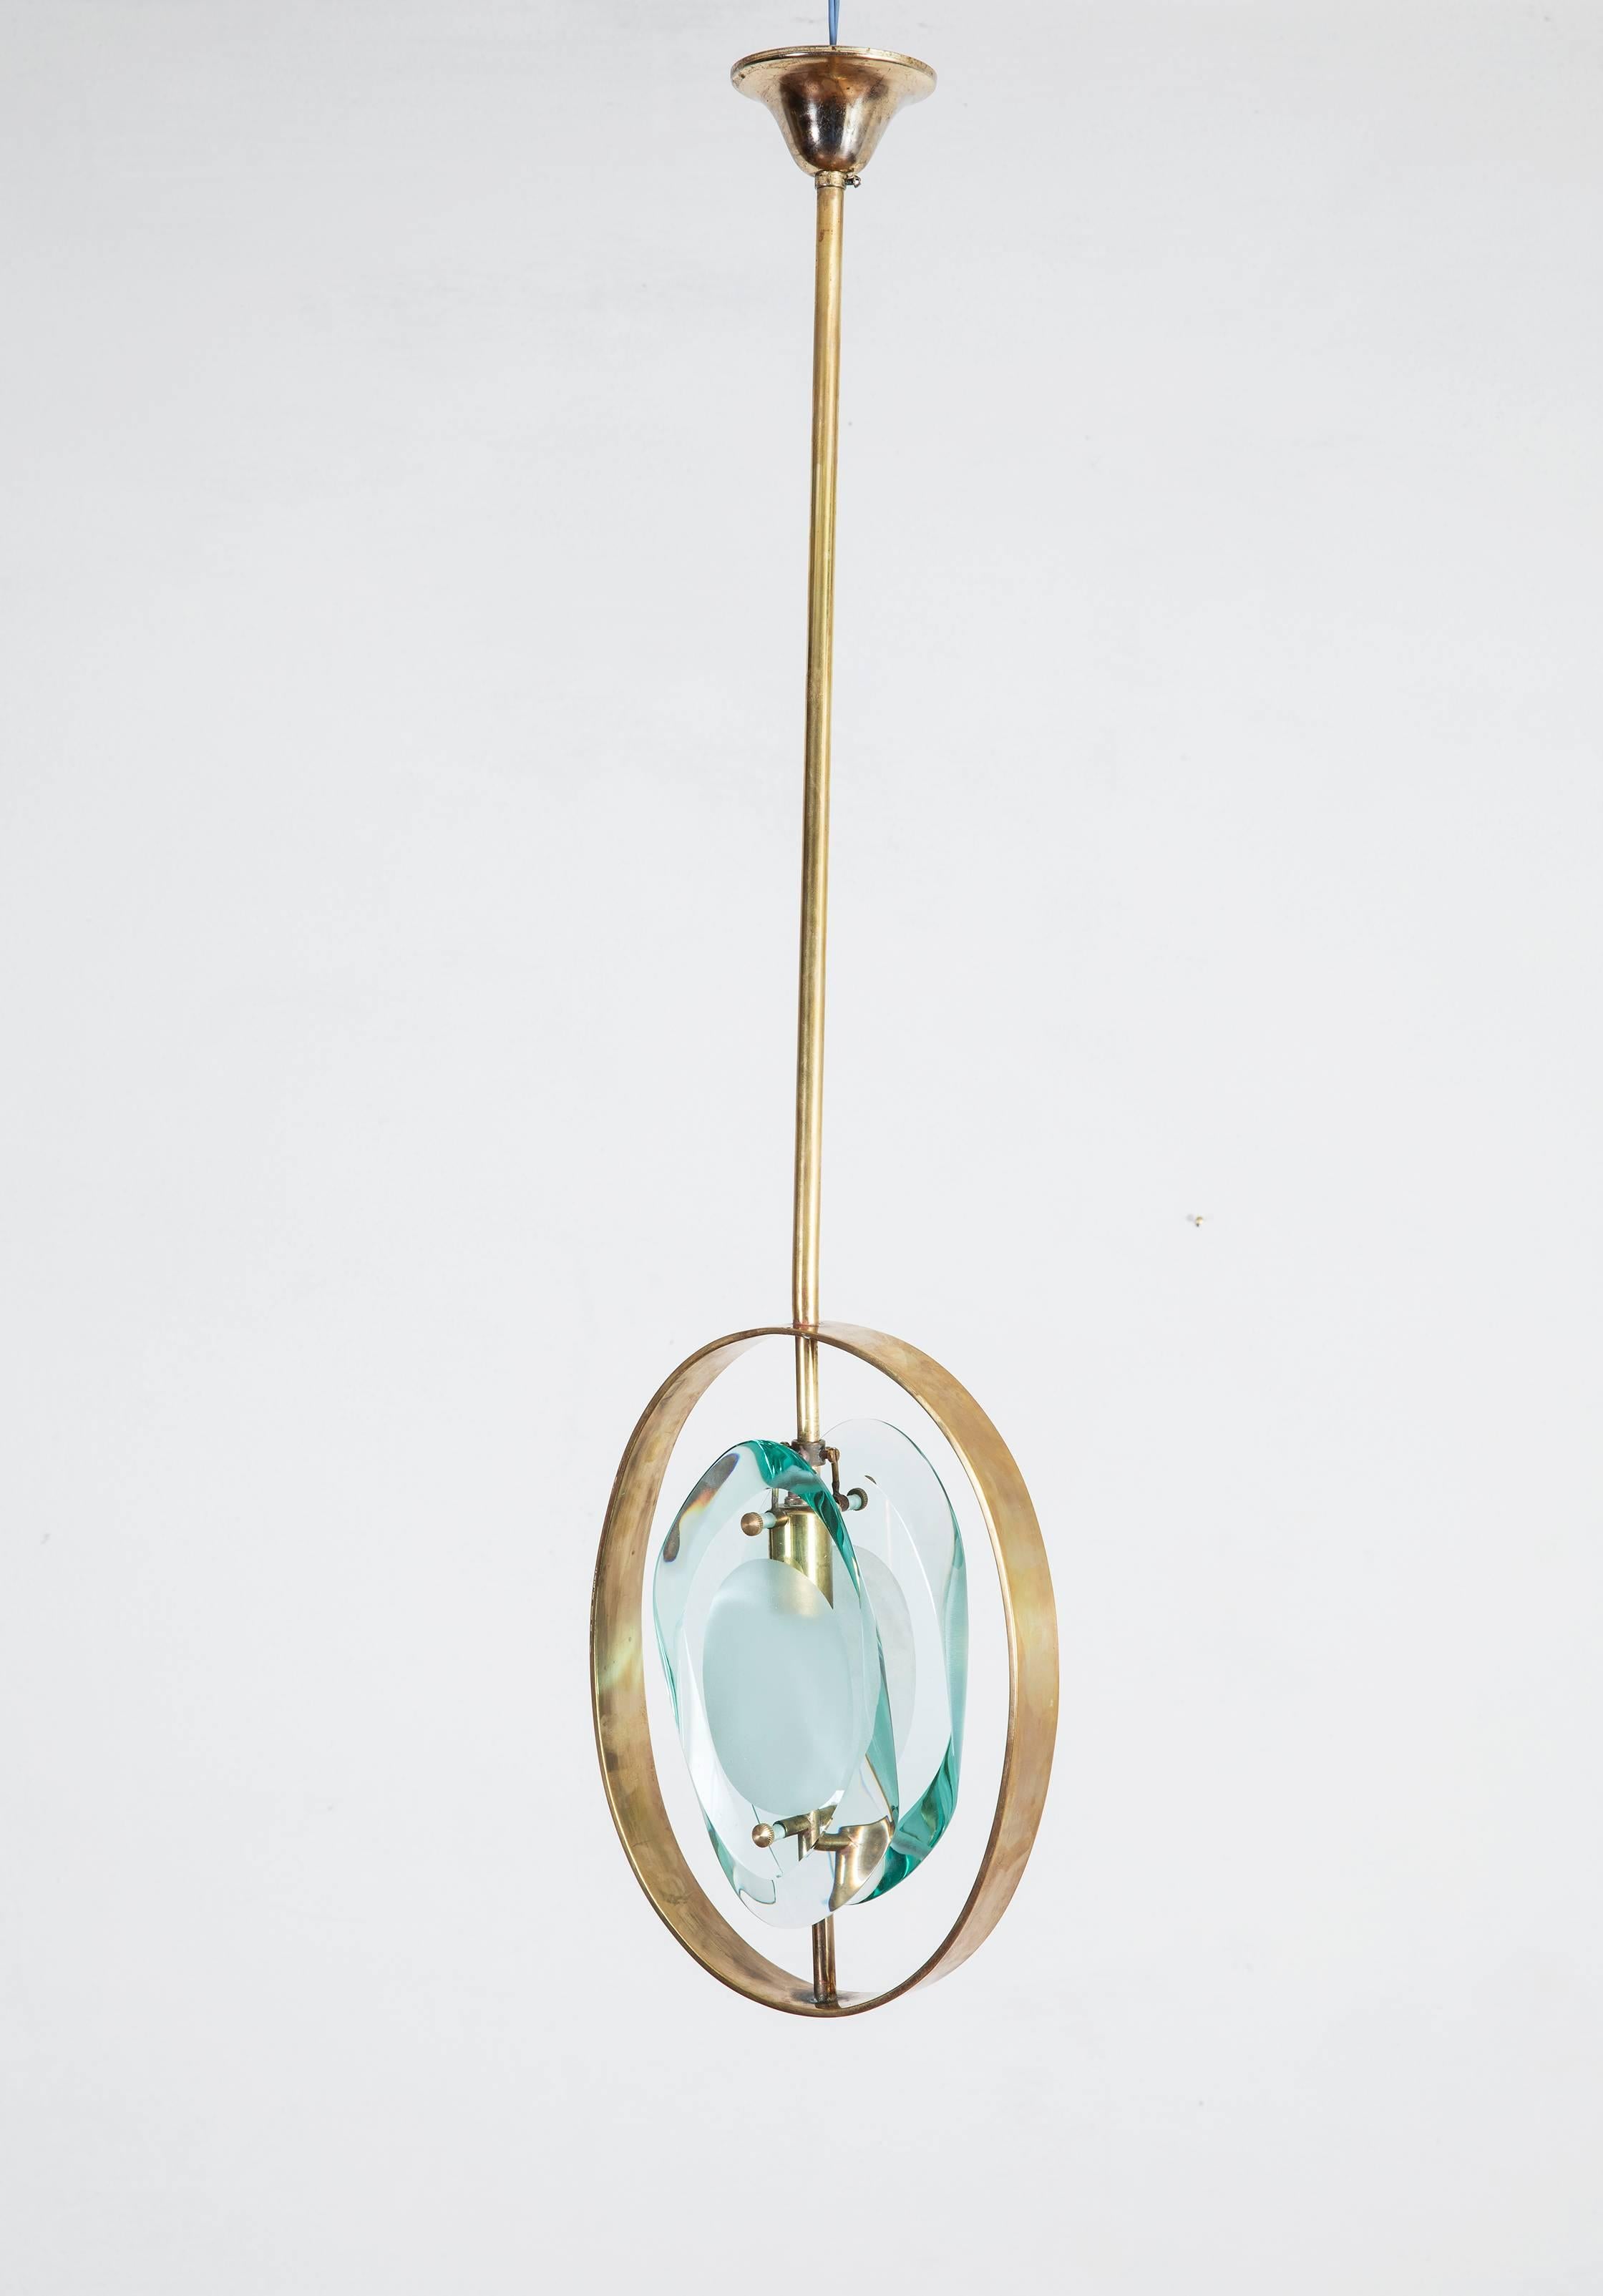 A wonderful original pendant ceiling light designed by Max Ingrand for Fontana Arte, circa 1961.
Model no 1933, from the Micro series, one of the iconic series by Max Ingrand, dated 1961, the light is made from two cut and carved glass chunks